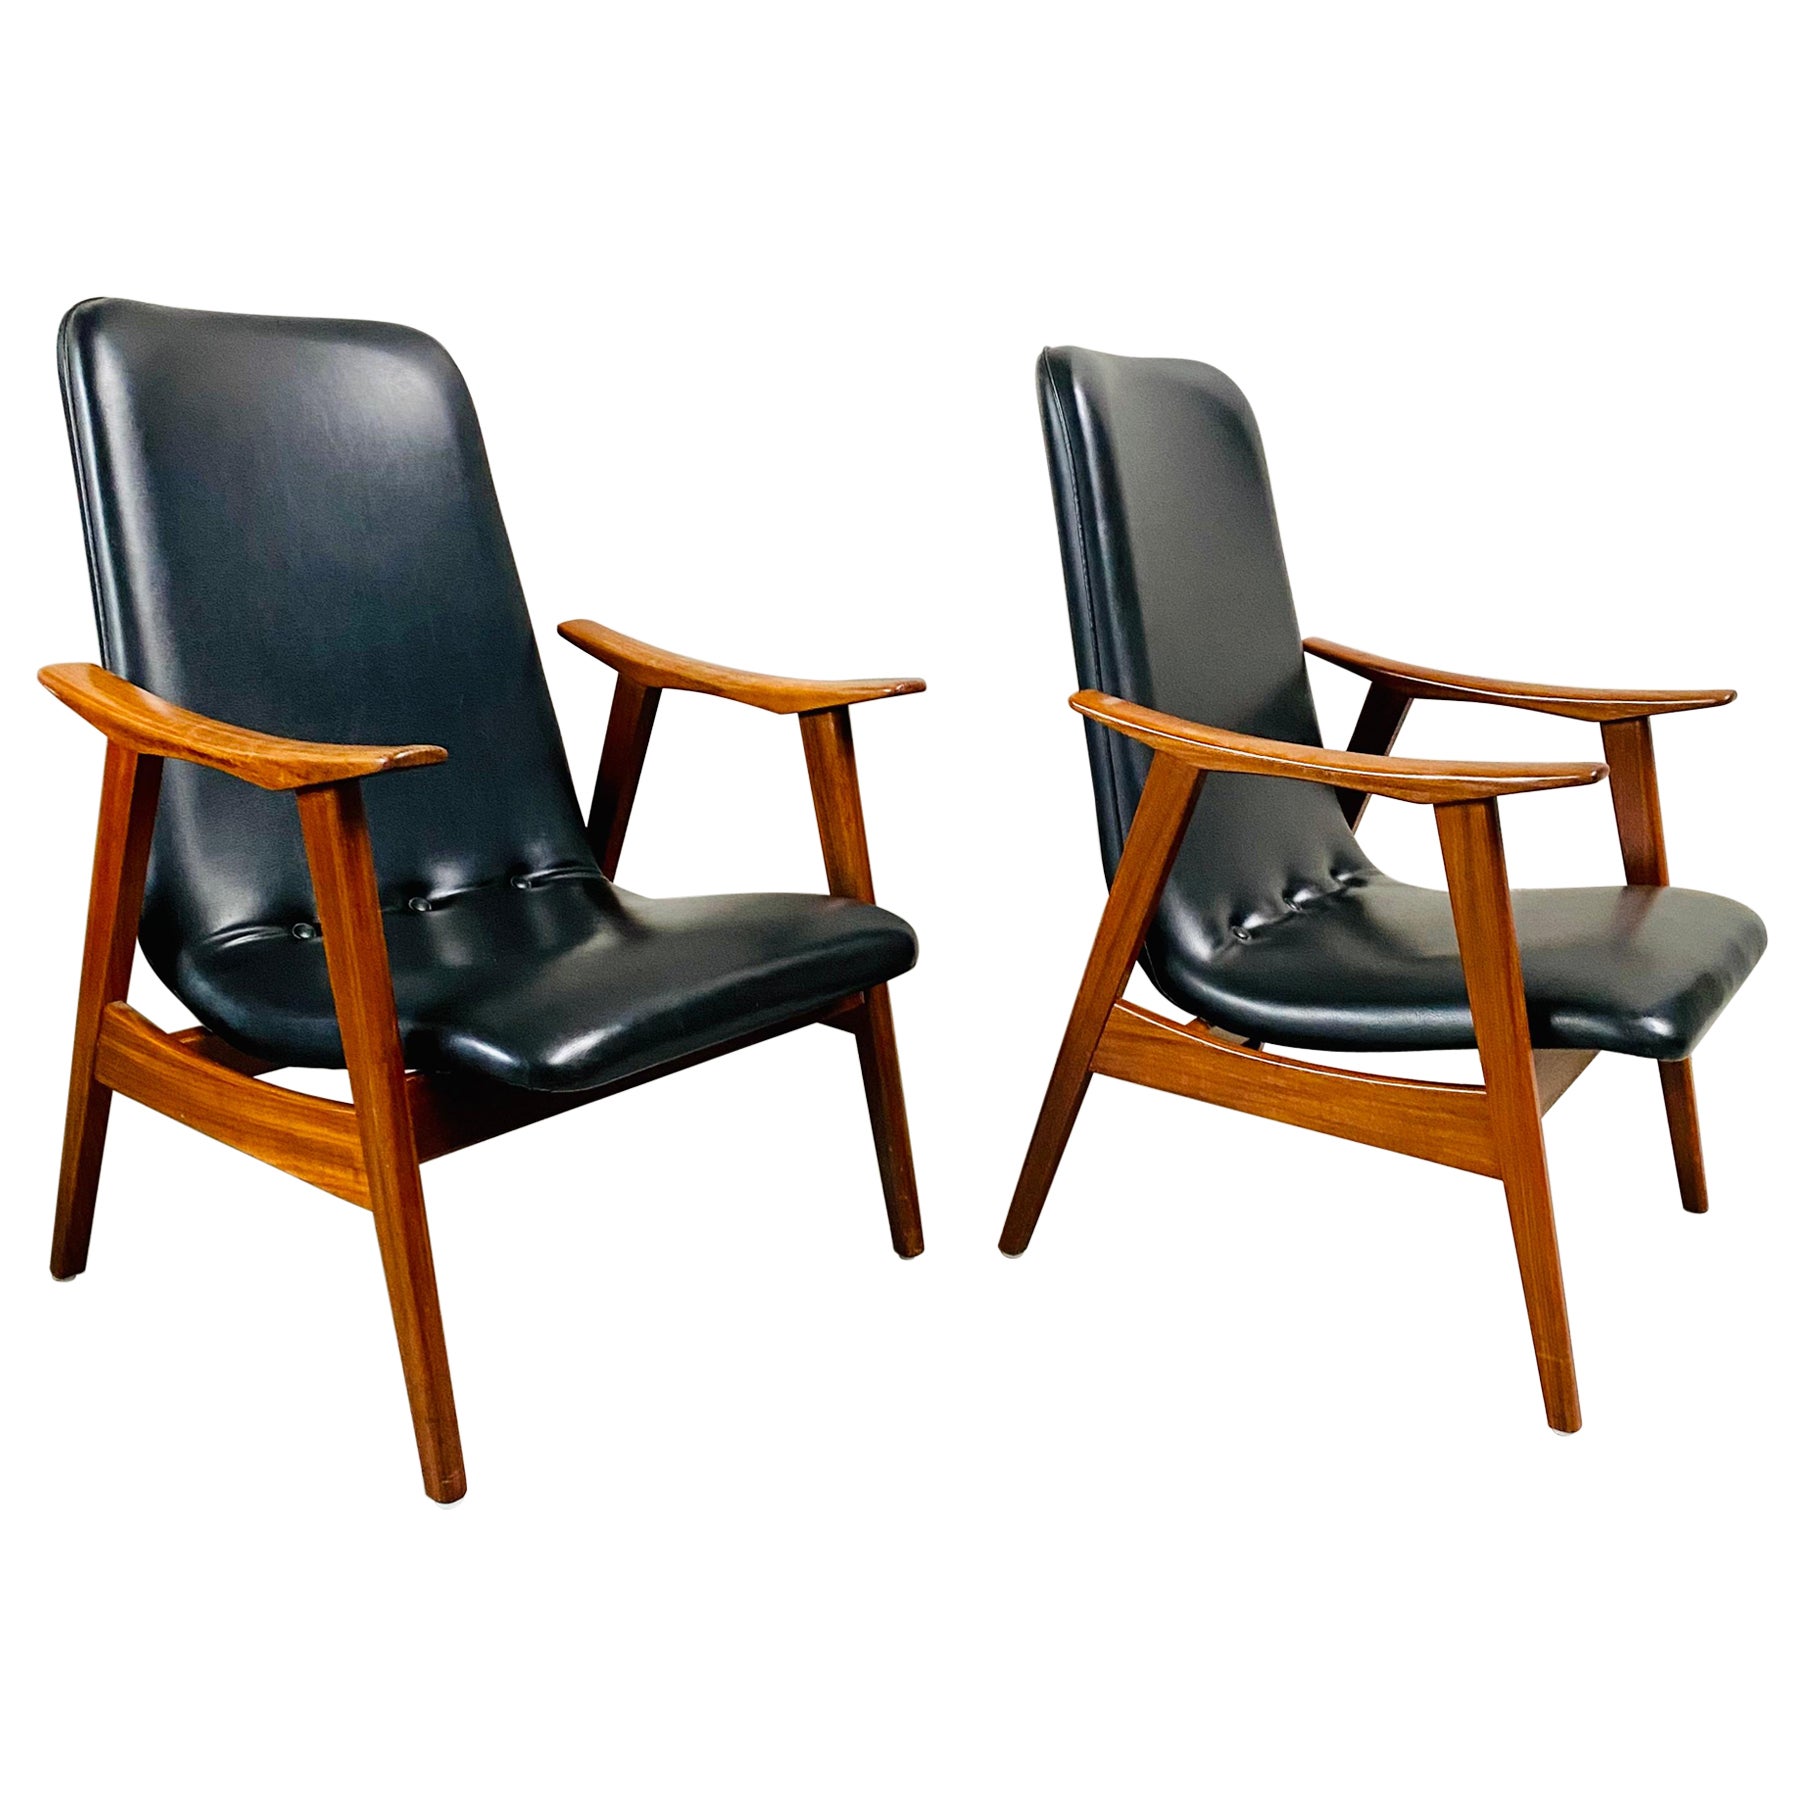 Set of Two Louis Van Teeffelen for Webe Lounge Chairs, Netherlands, 1960s For Sale